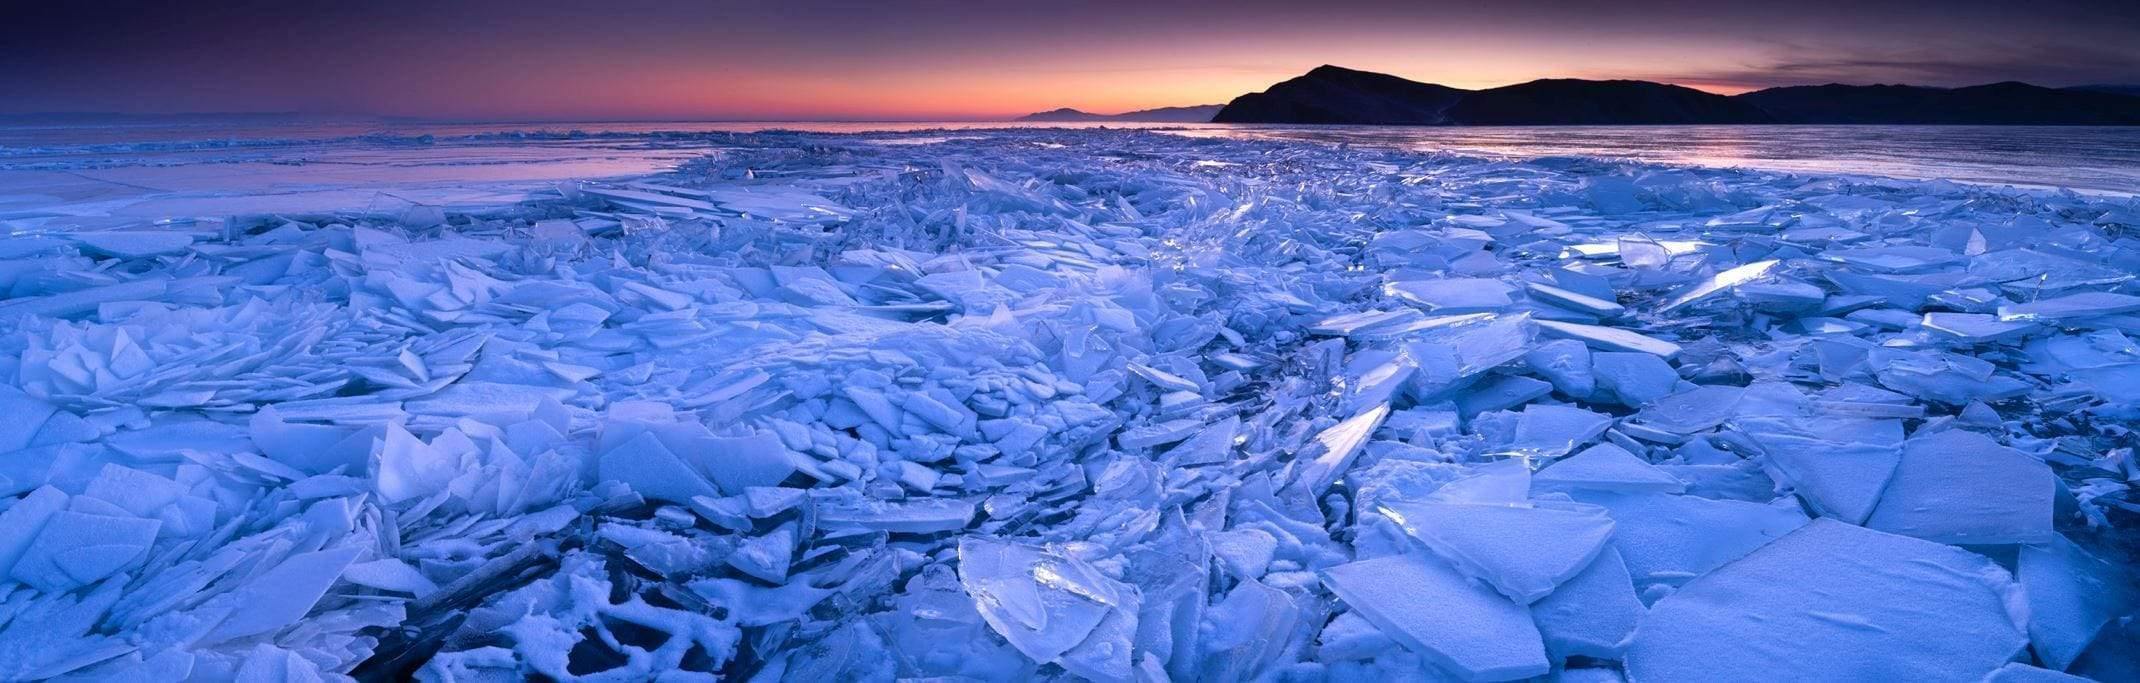 A landscape view presenting thousands of broken ice pieces depicting like a giant broken wall of glassy snow, Baikal Ice - Russia 